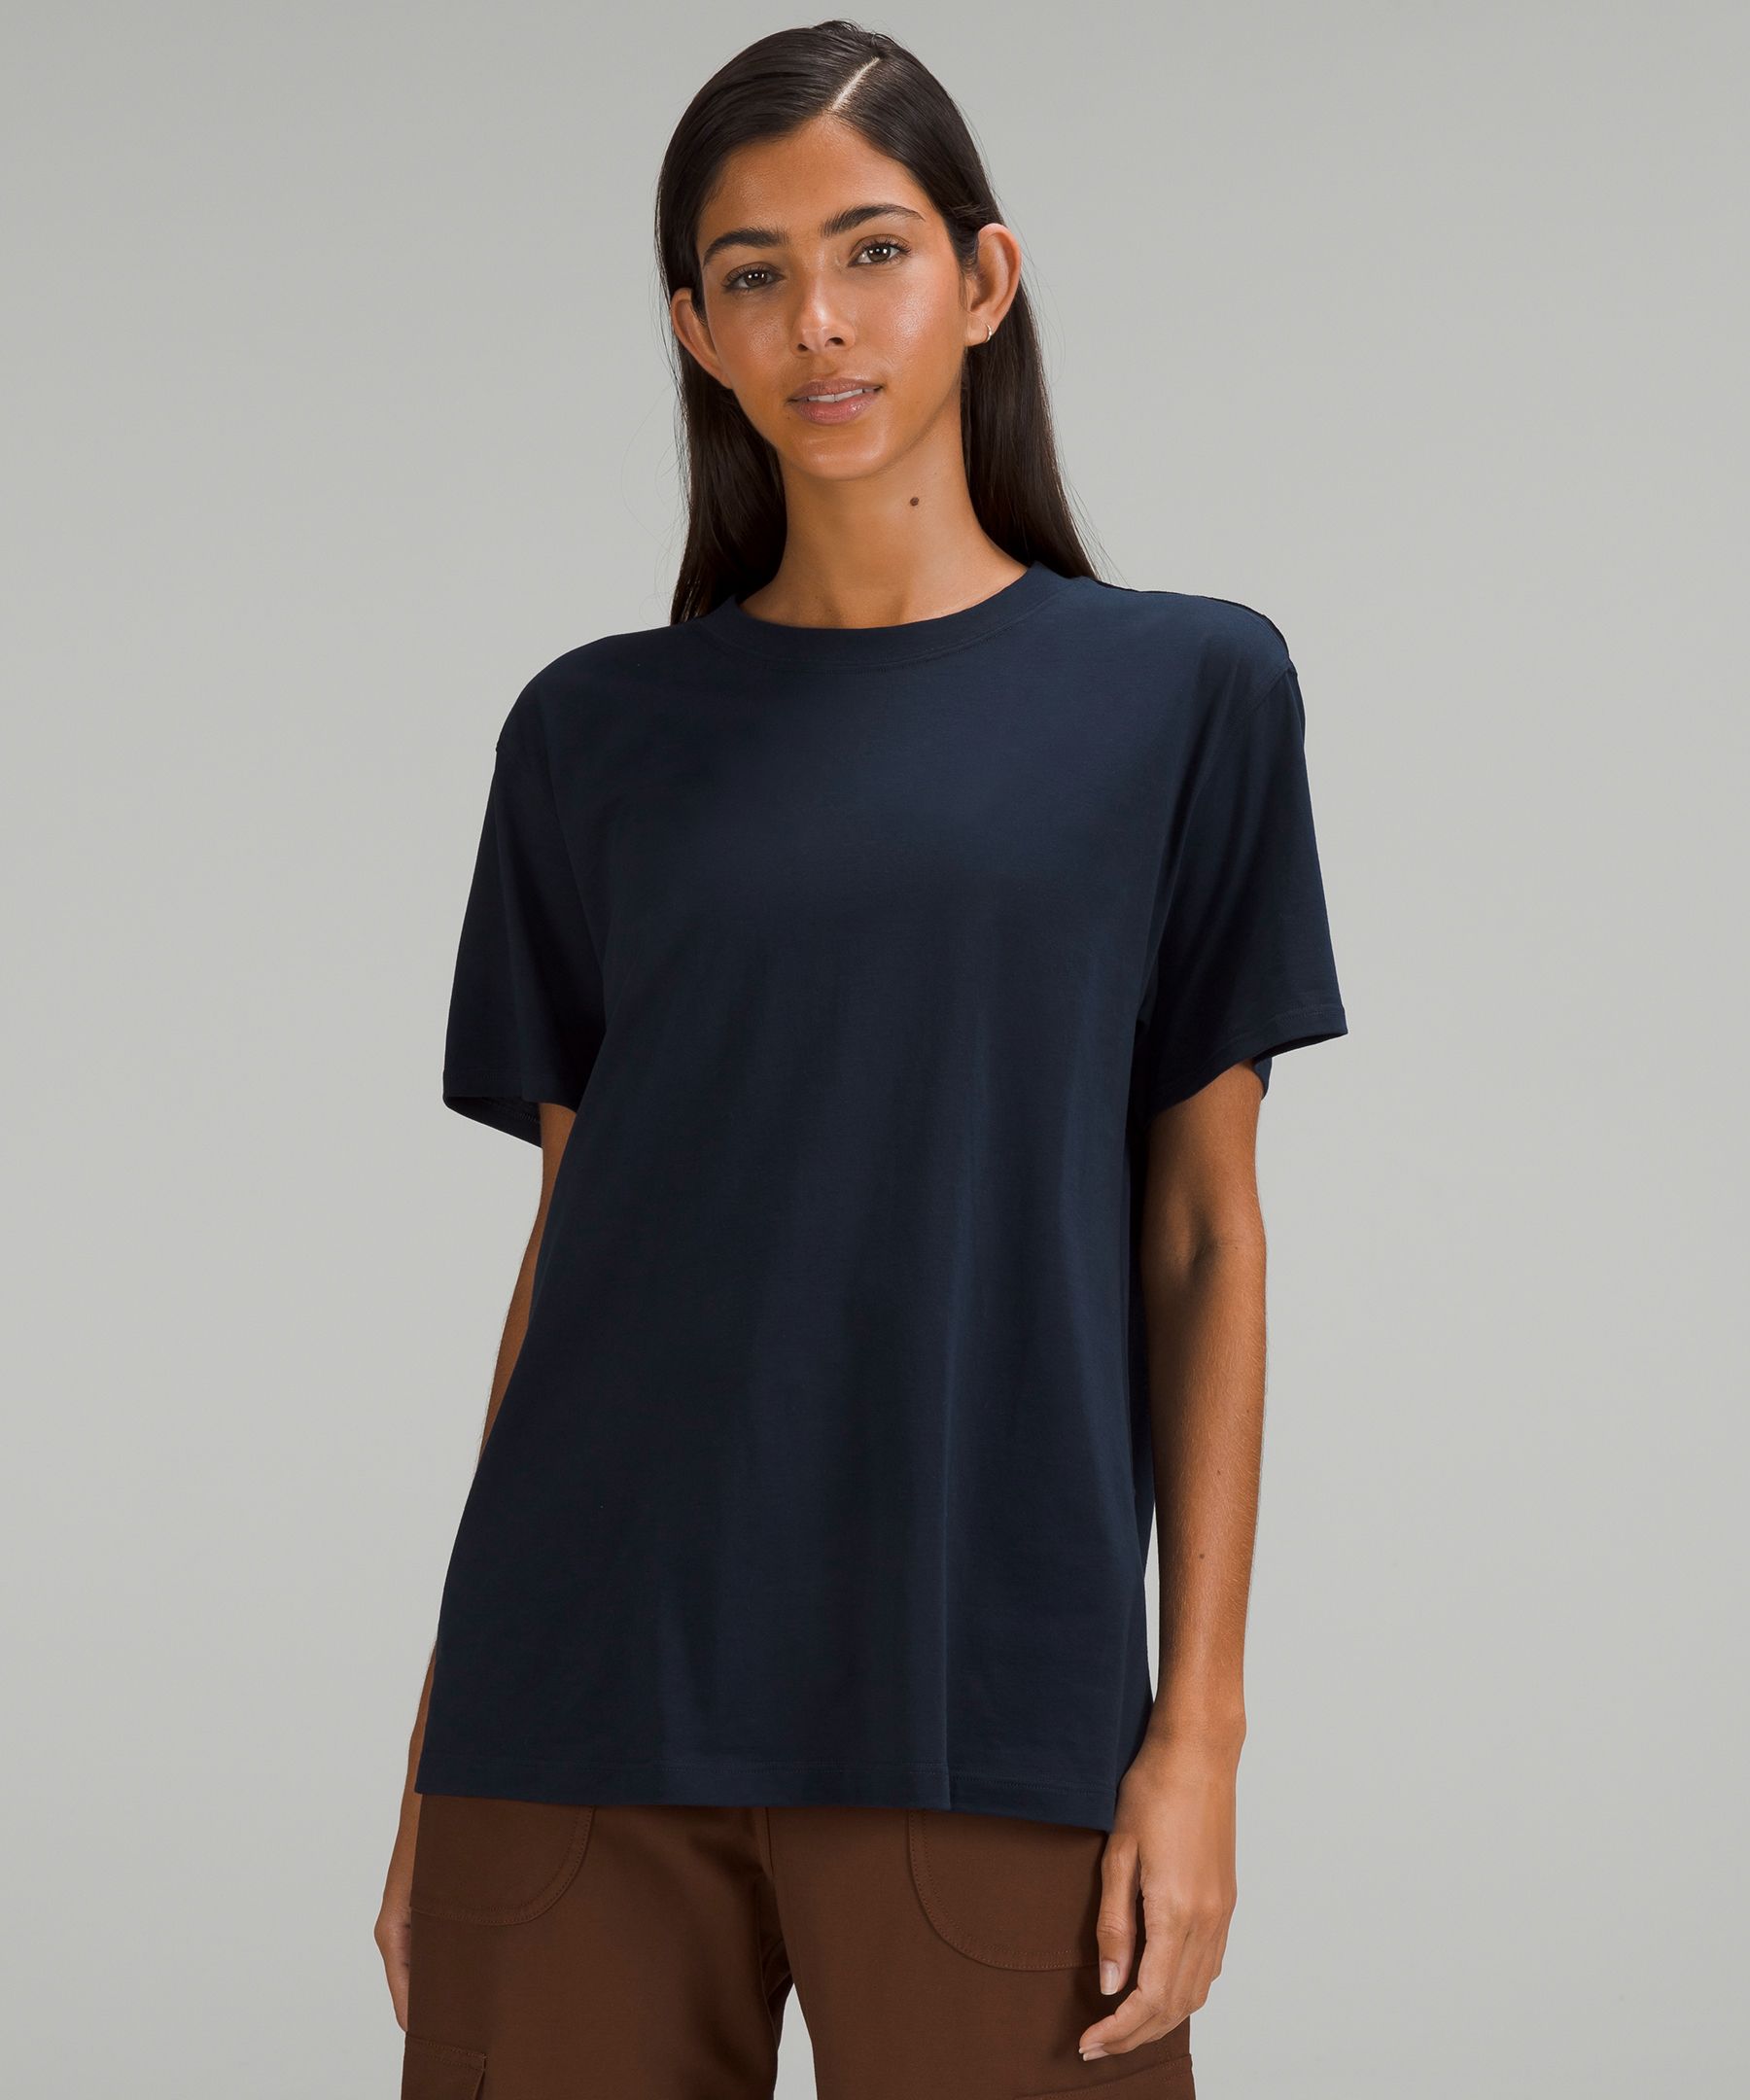 Lululemon All Yours Cotton T-shirt